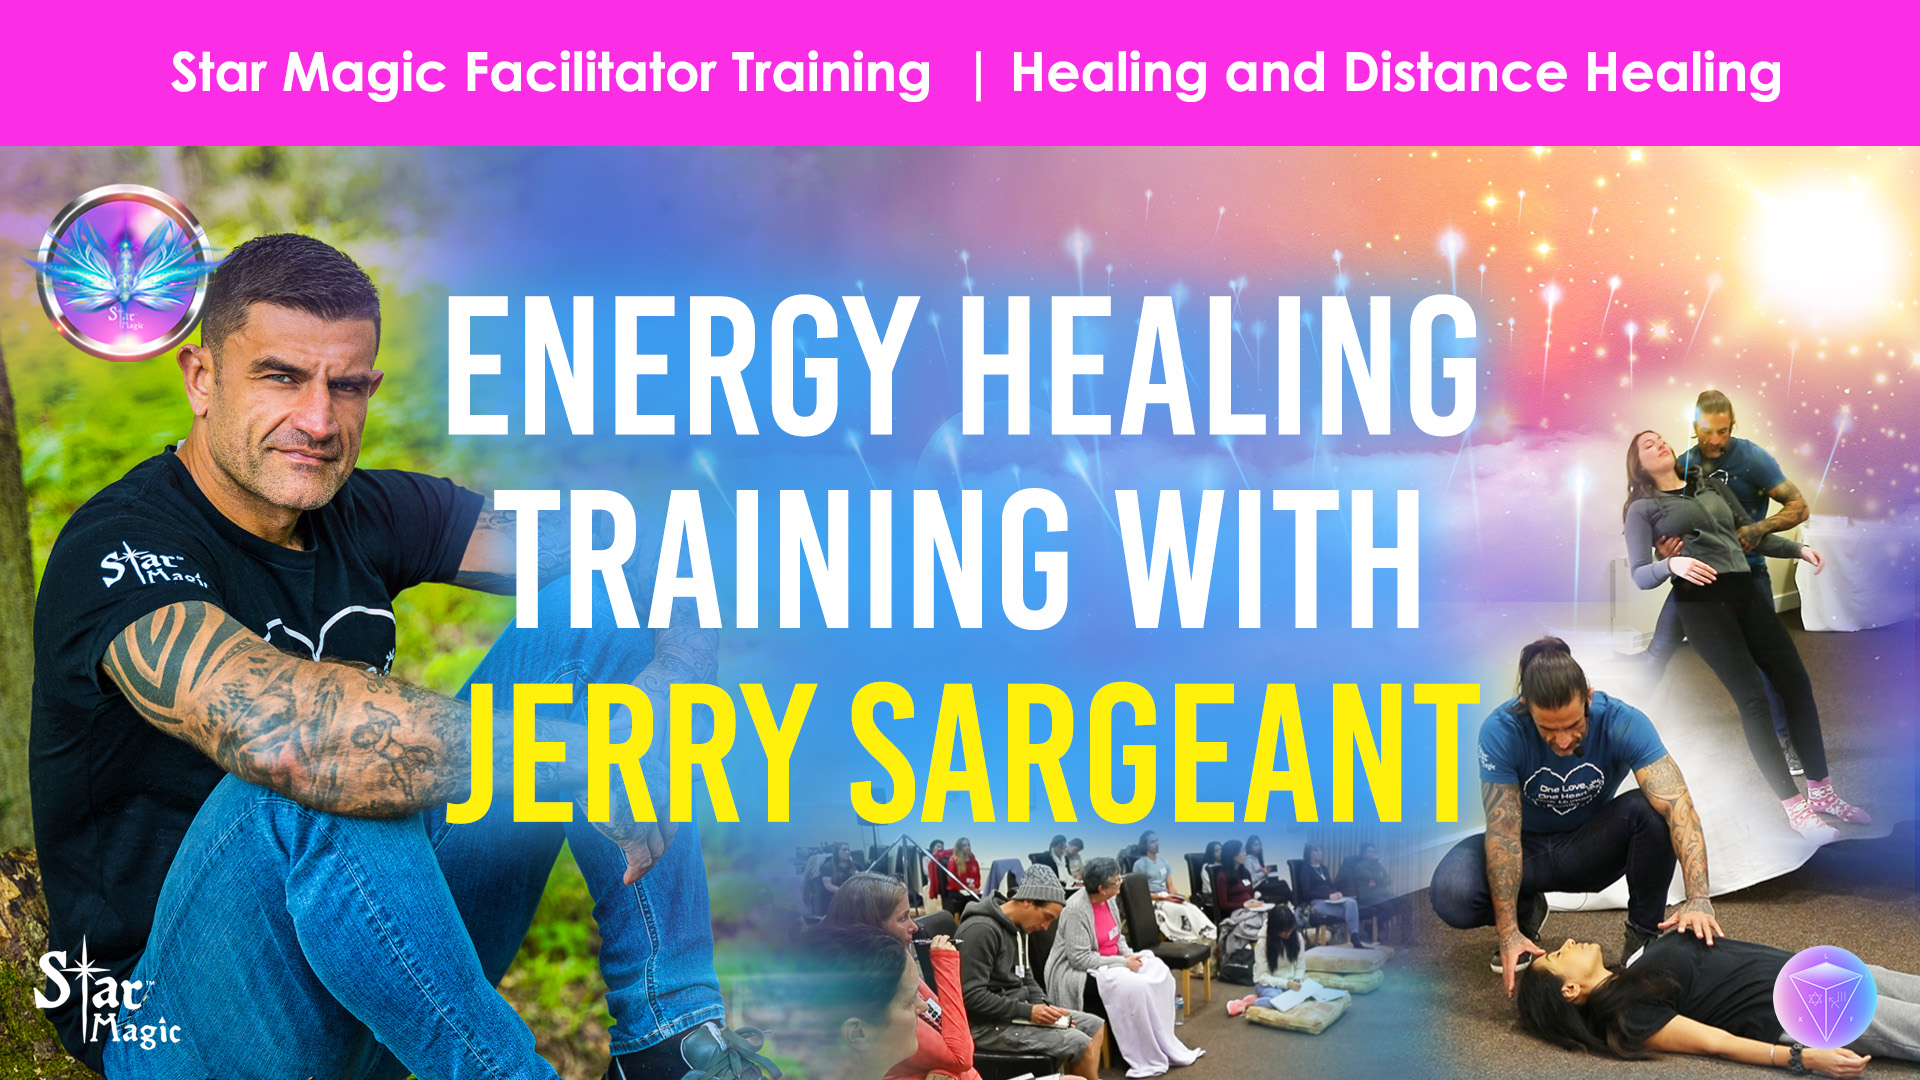 Star Magic | Energy Healing Training With Jerry Sargeant